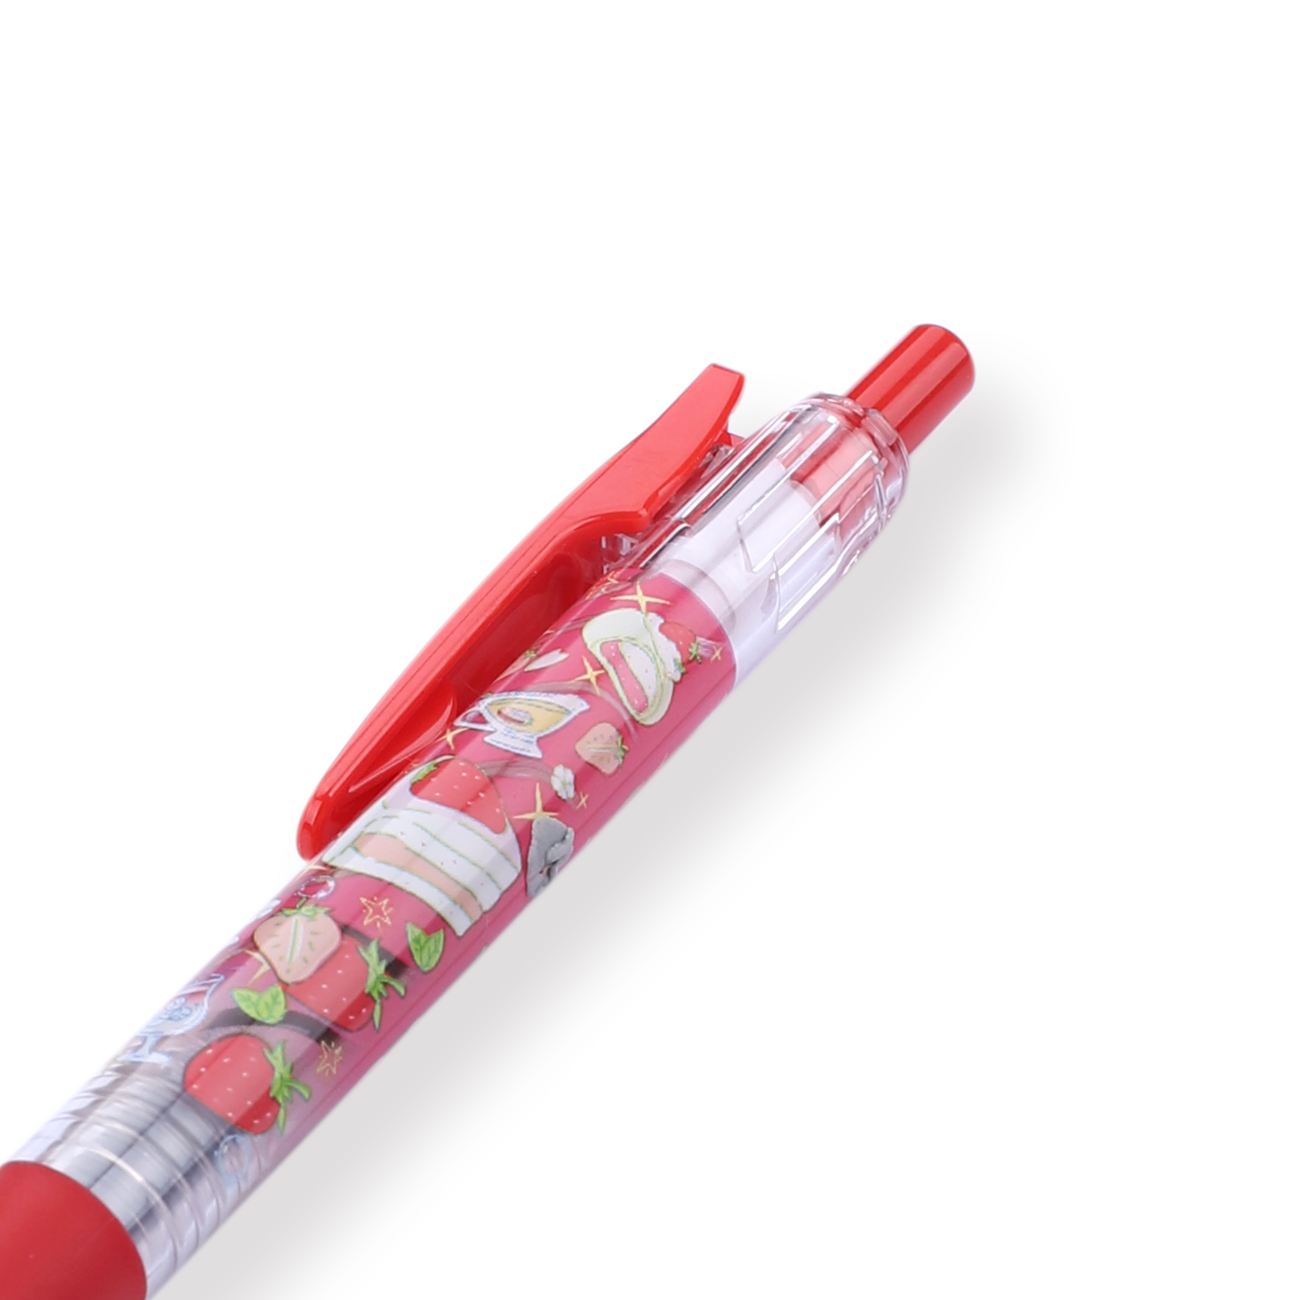 Zebra Sarasa Clip Limited Edition Gel Pen - 0.5 mm - Western Confectionery Series - Red Body - Stationery Pal